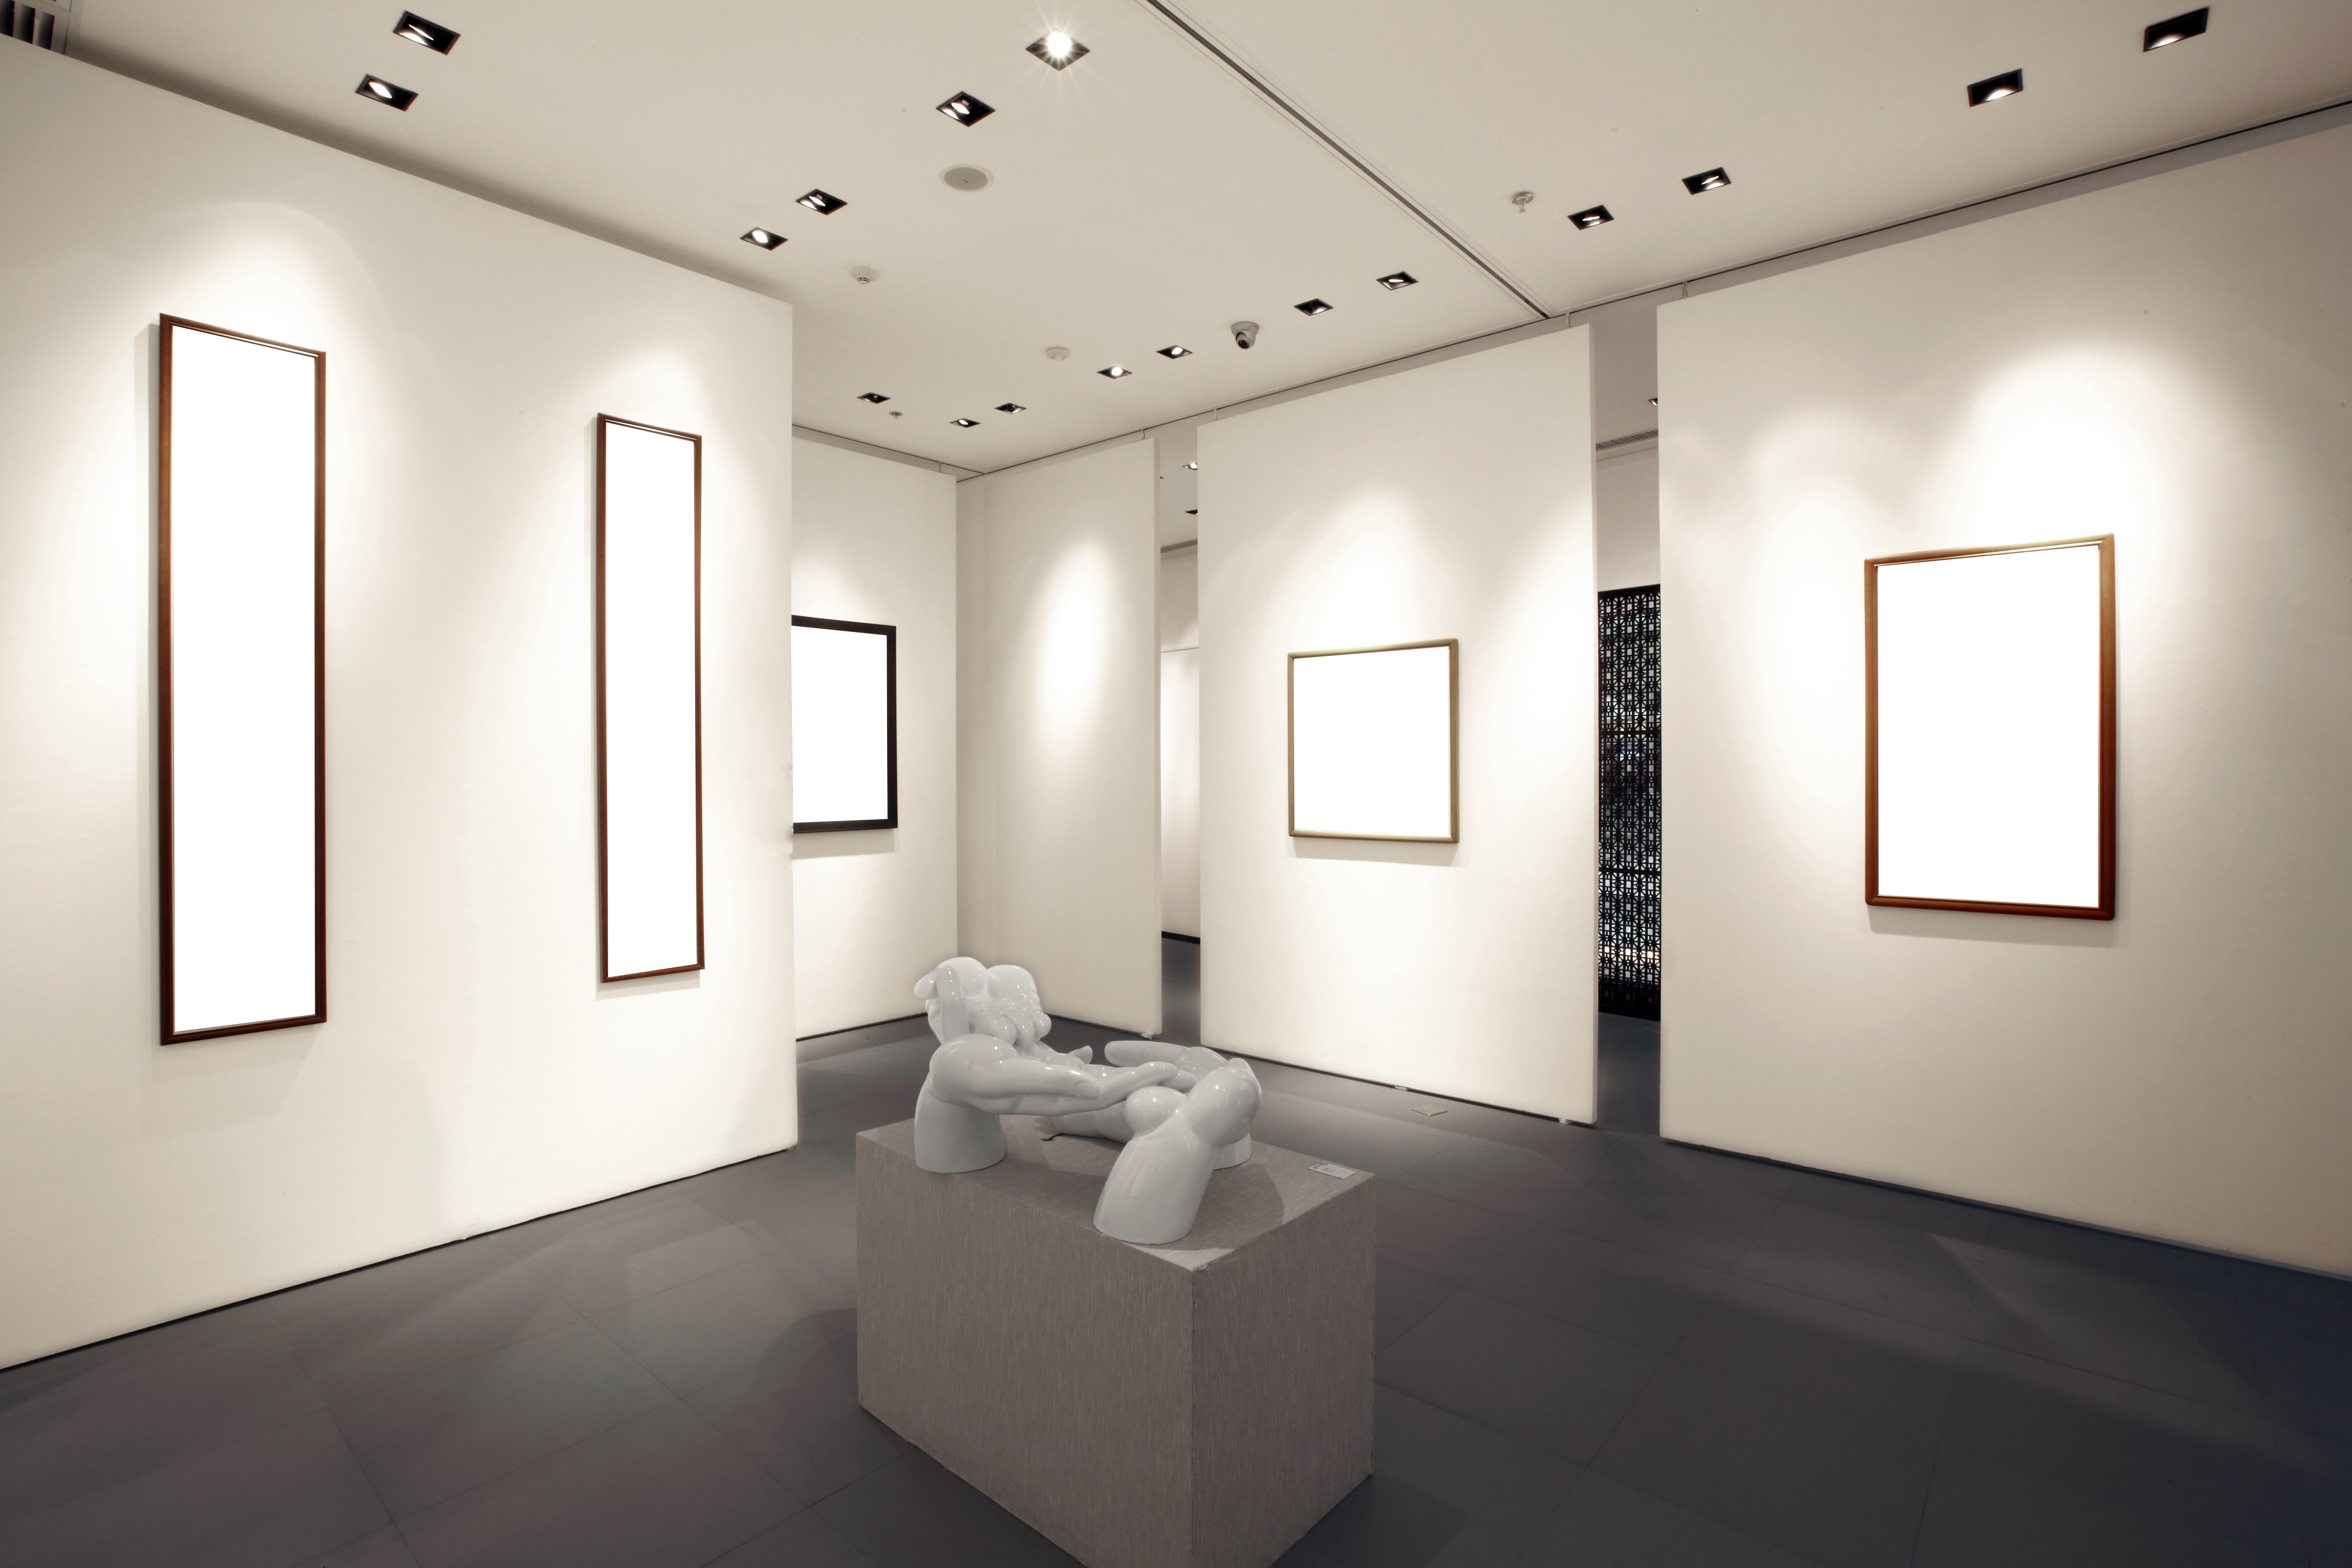 Adjustable trimless recessed lights offer a more polished, clean approach to gallery lighting